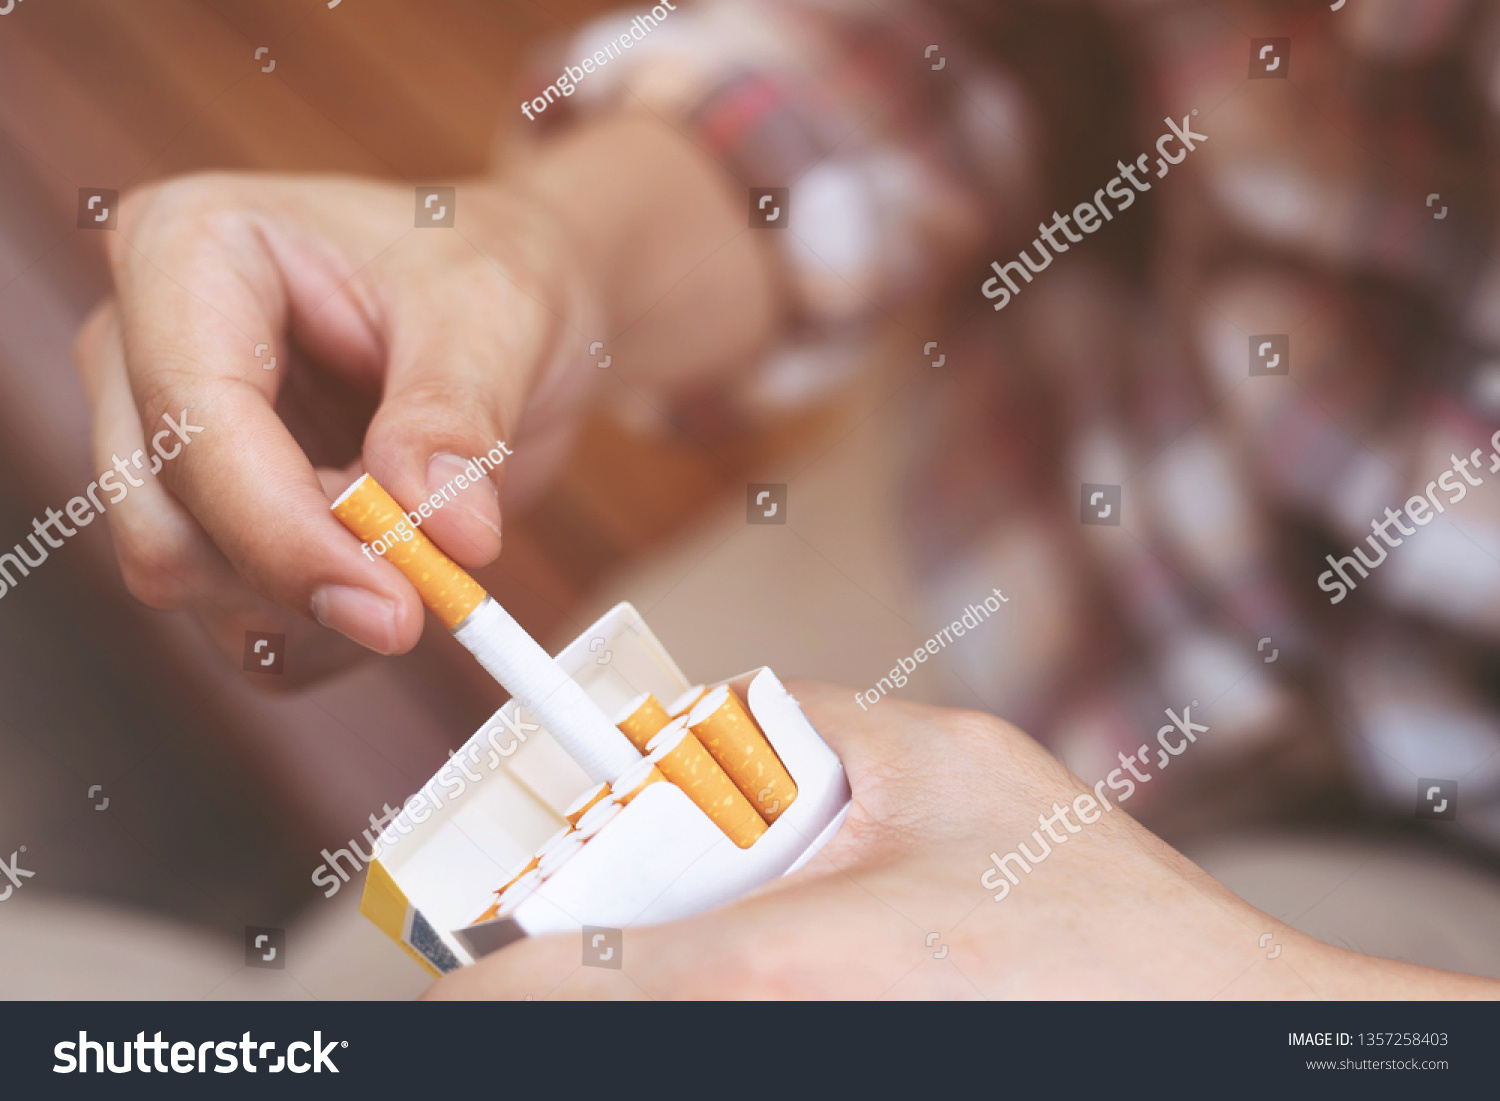 close up man hand holding peel it off cigarette pack prepare smoking a cigarette. Packing line up. photo filters Natural light. #1357258403